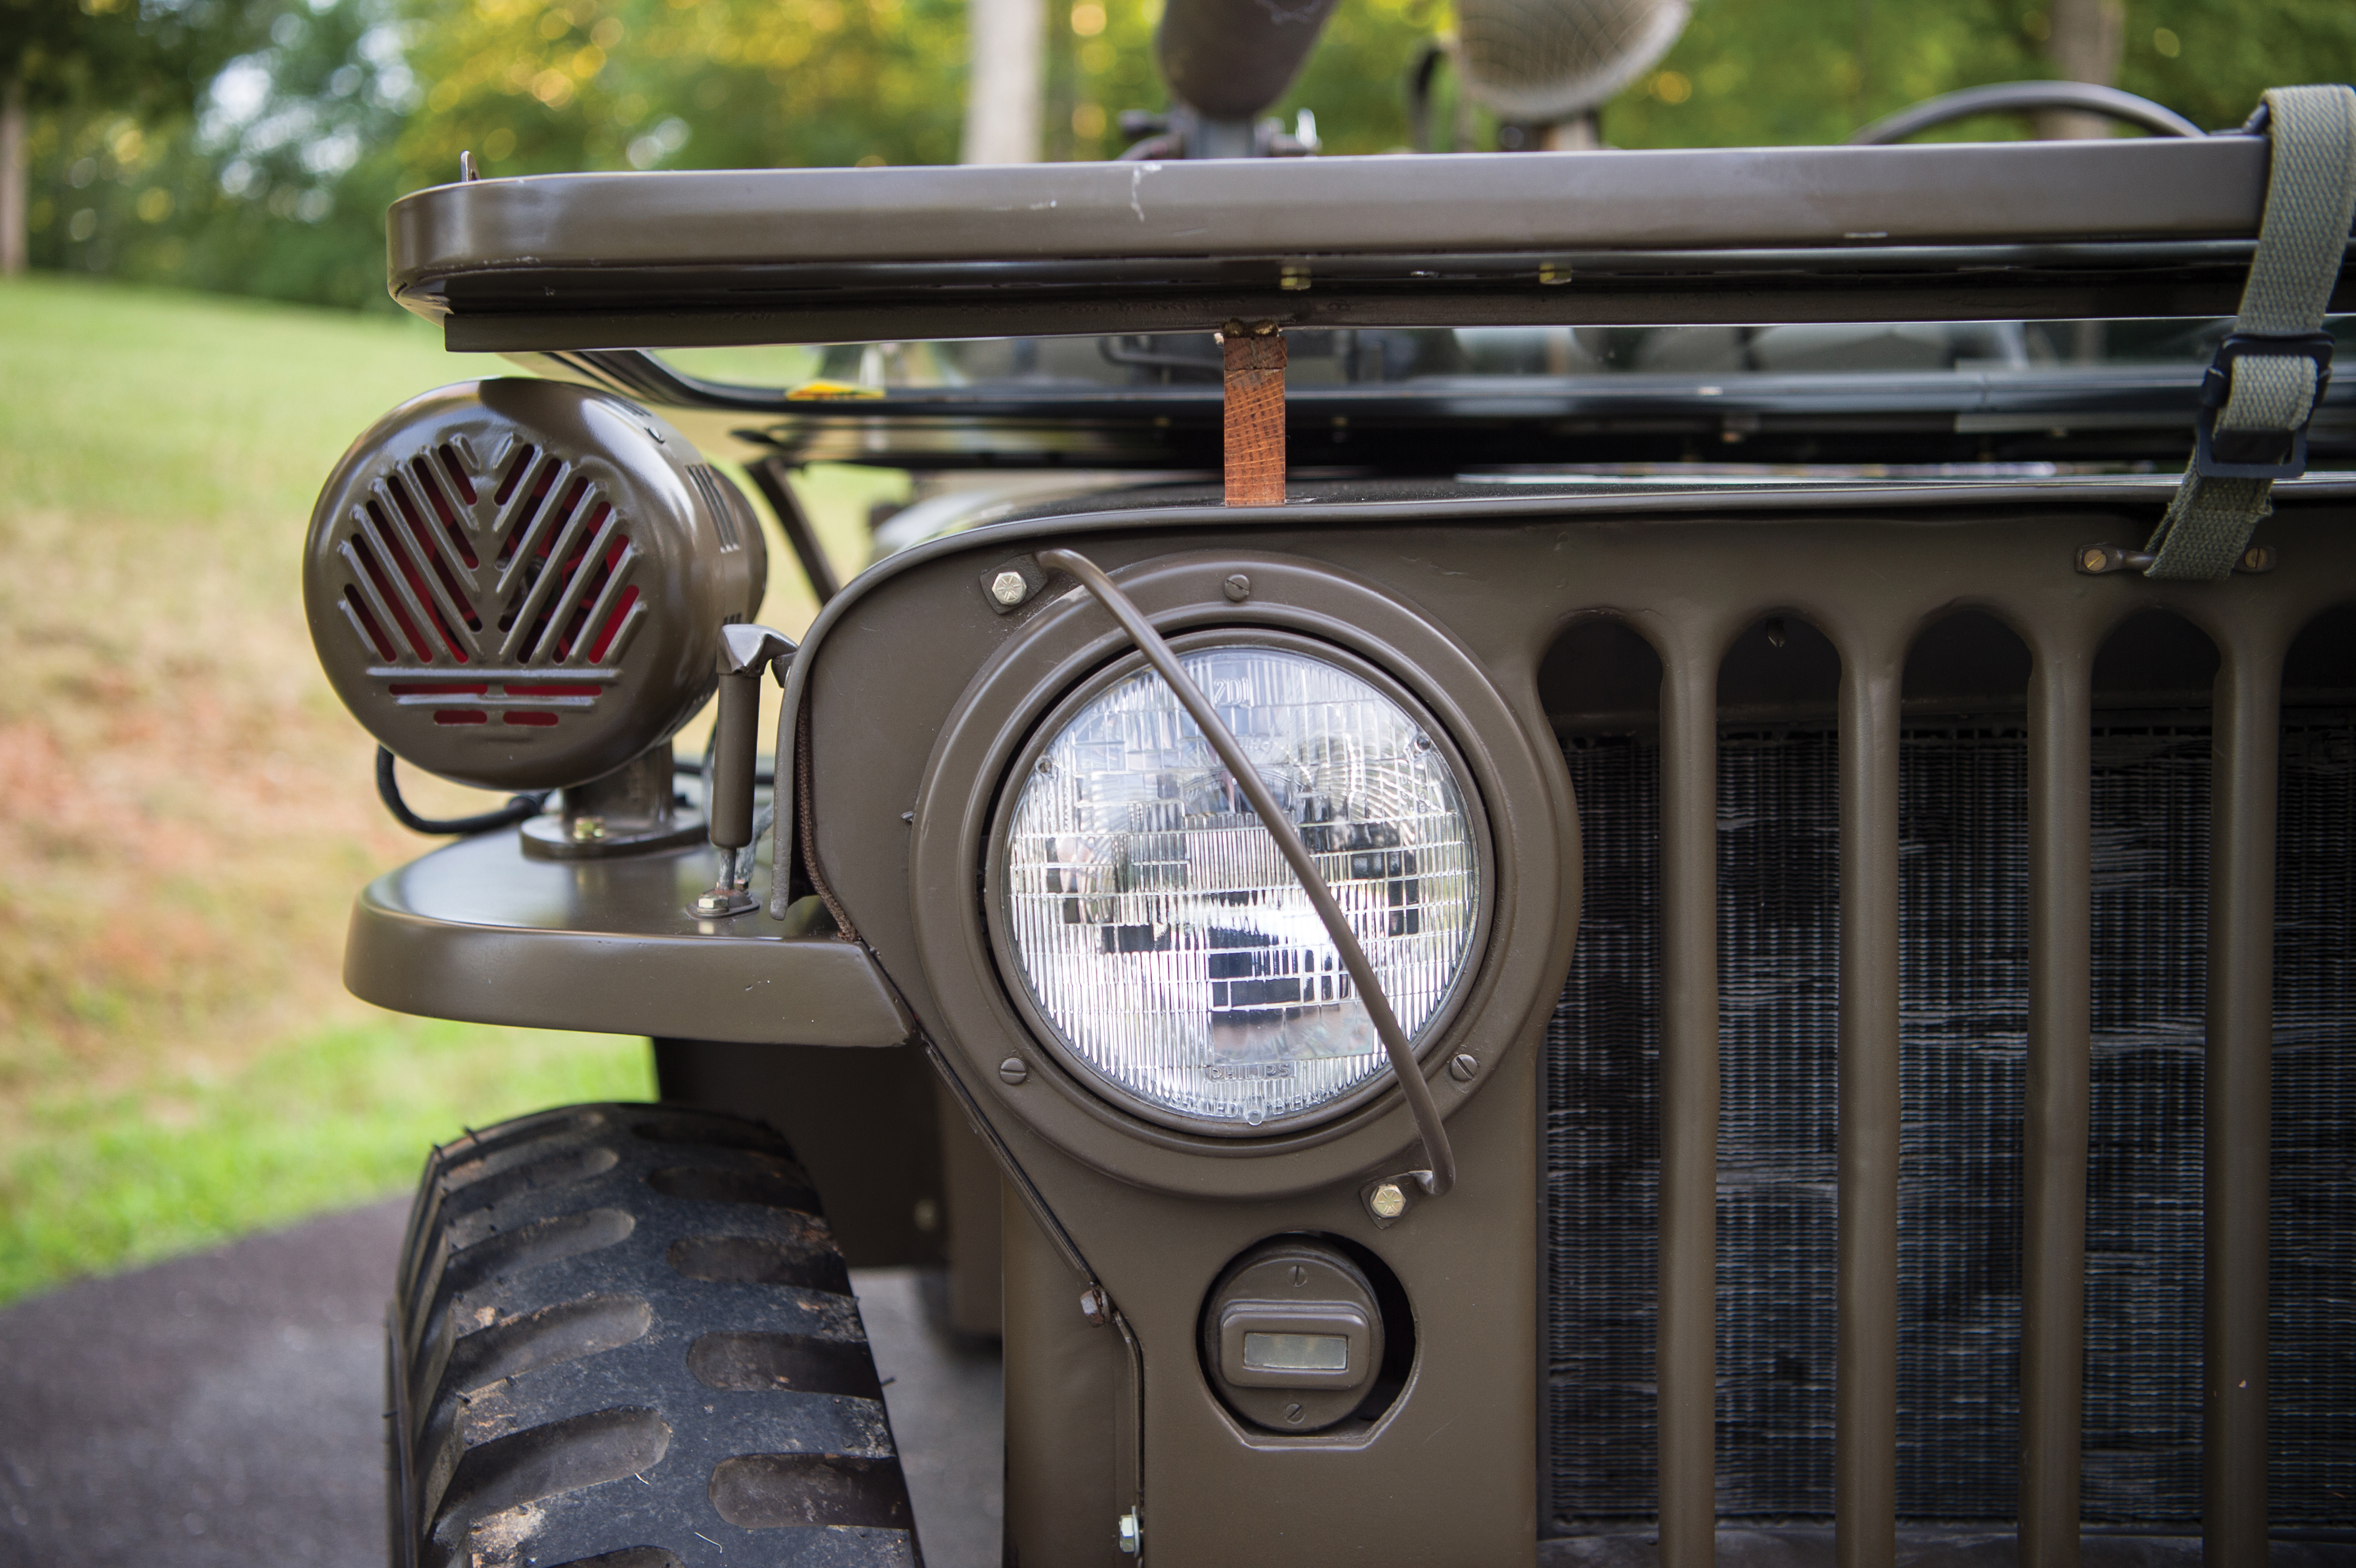 1952 willys-overland m38a1 1/4 ton